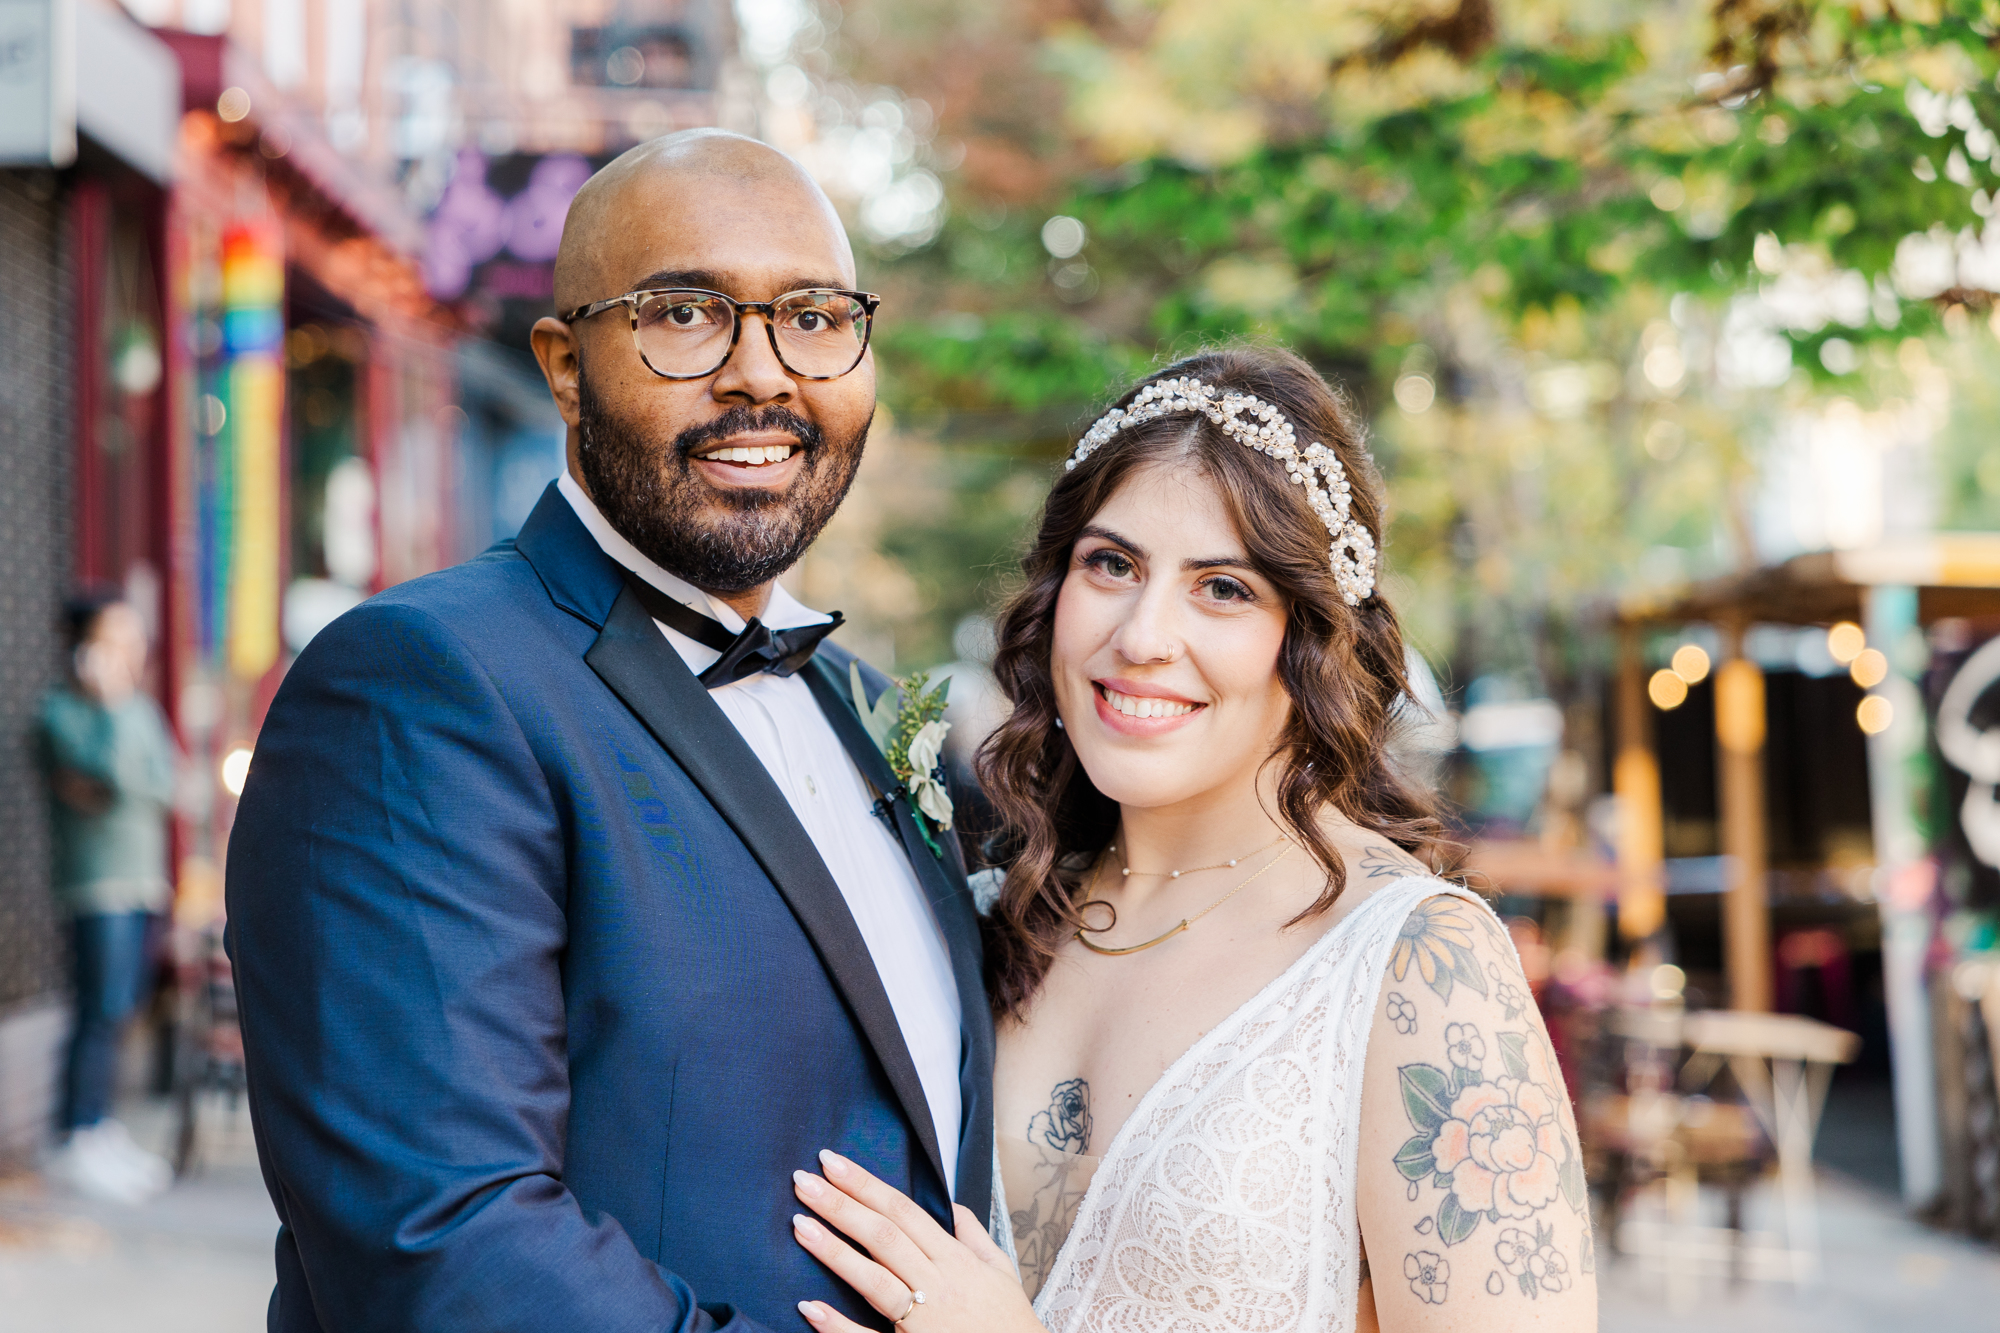 Joyful Deity Wedding Photography at Unique Event Space in Downtown Brooklyn in Autumn